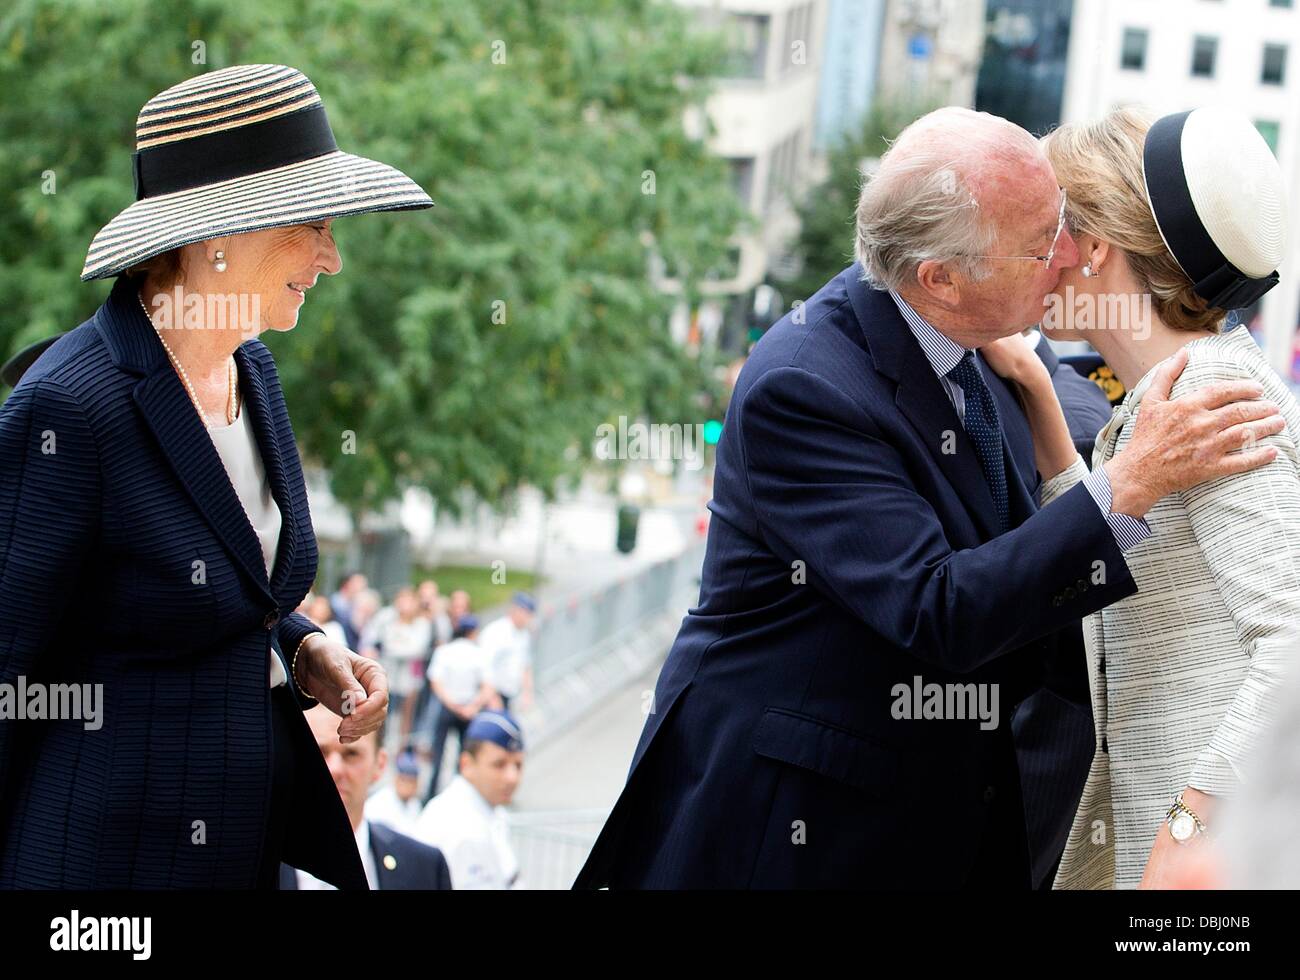 Brussels, Belgium. 31st July, 2013. Queen Mathilde, King Albert and Queen Paola of Belgium attend the mass to commemorate the death of King Baudouin 20 years ago at the Cathedral in Brussels, Belgium, 31 July 2013. Photo: Patrick van Katwijk/dpa/Alamy Live News Stock Photo